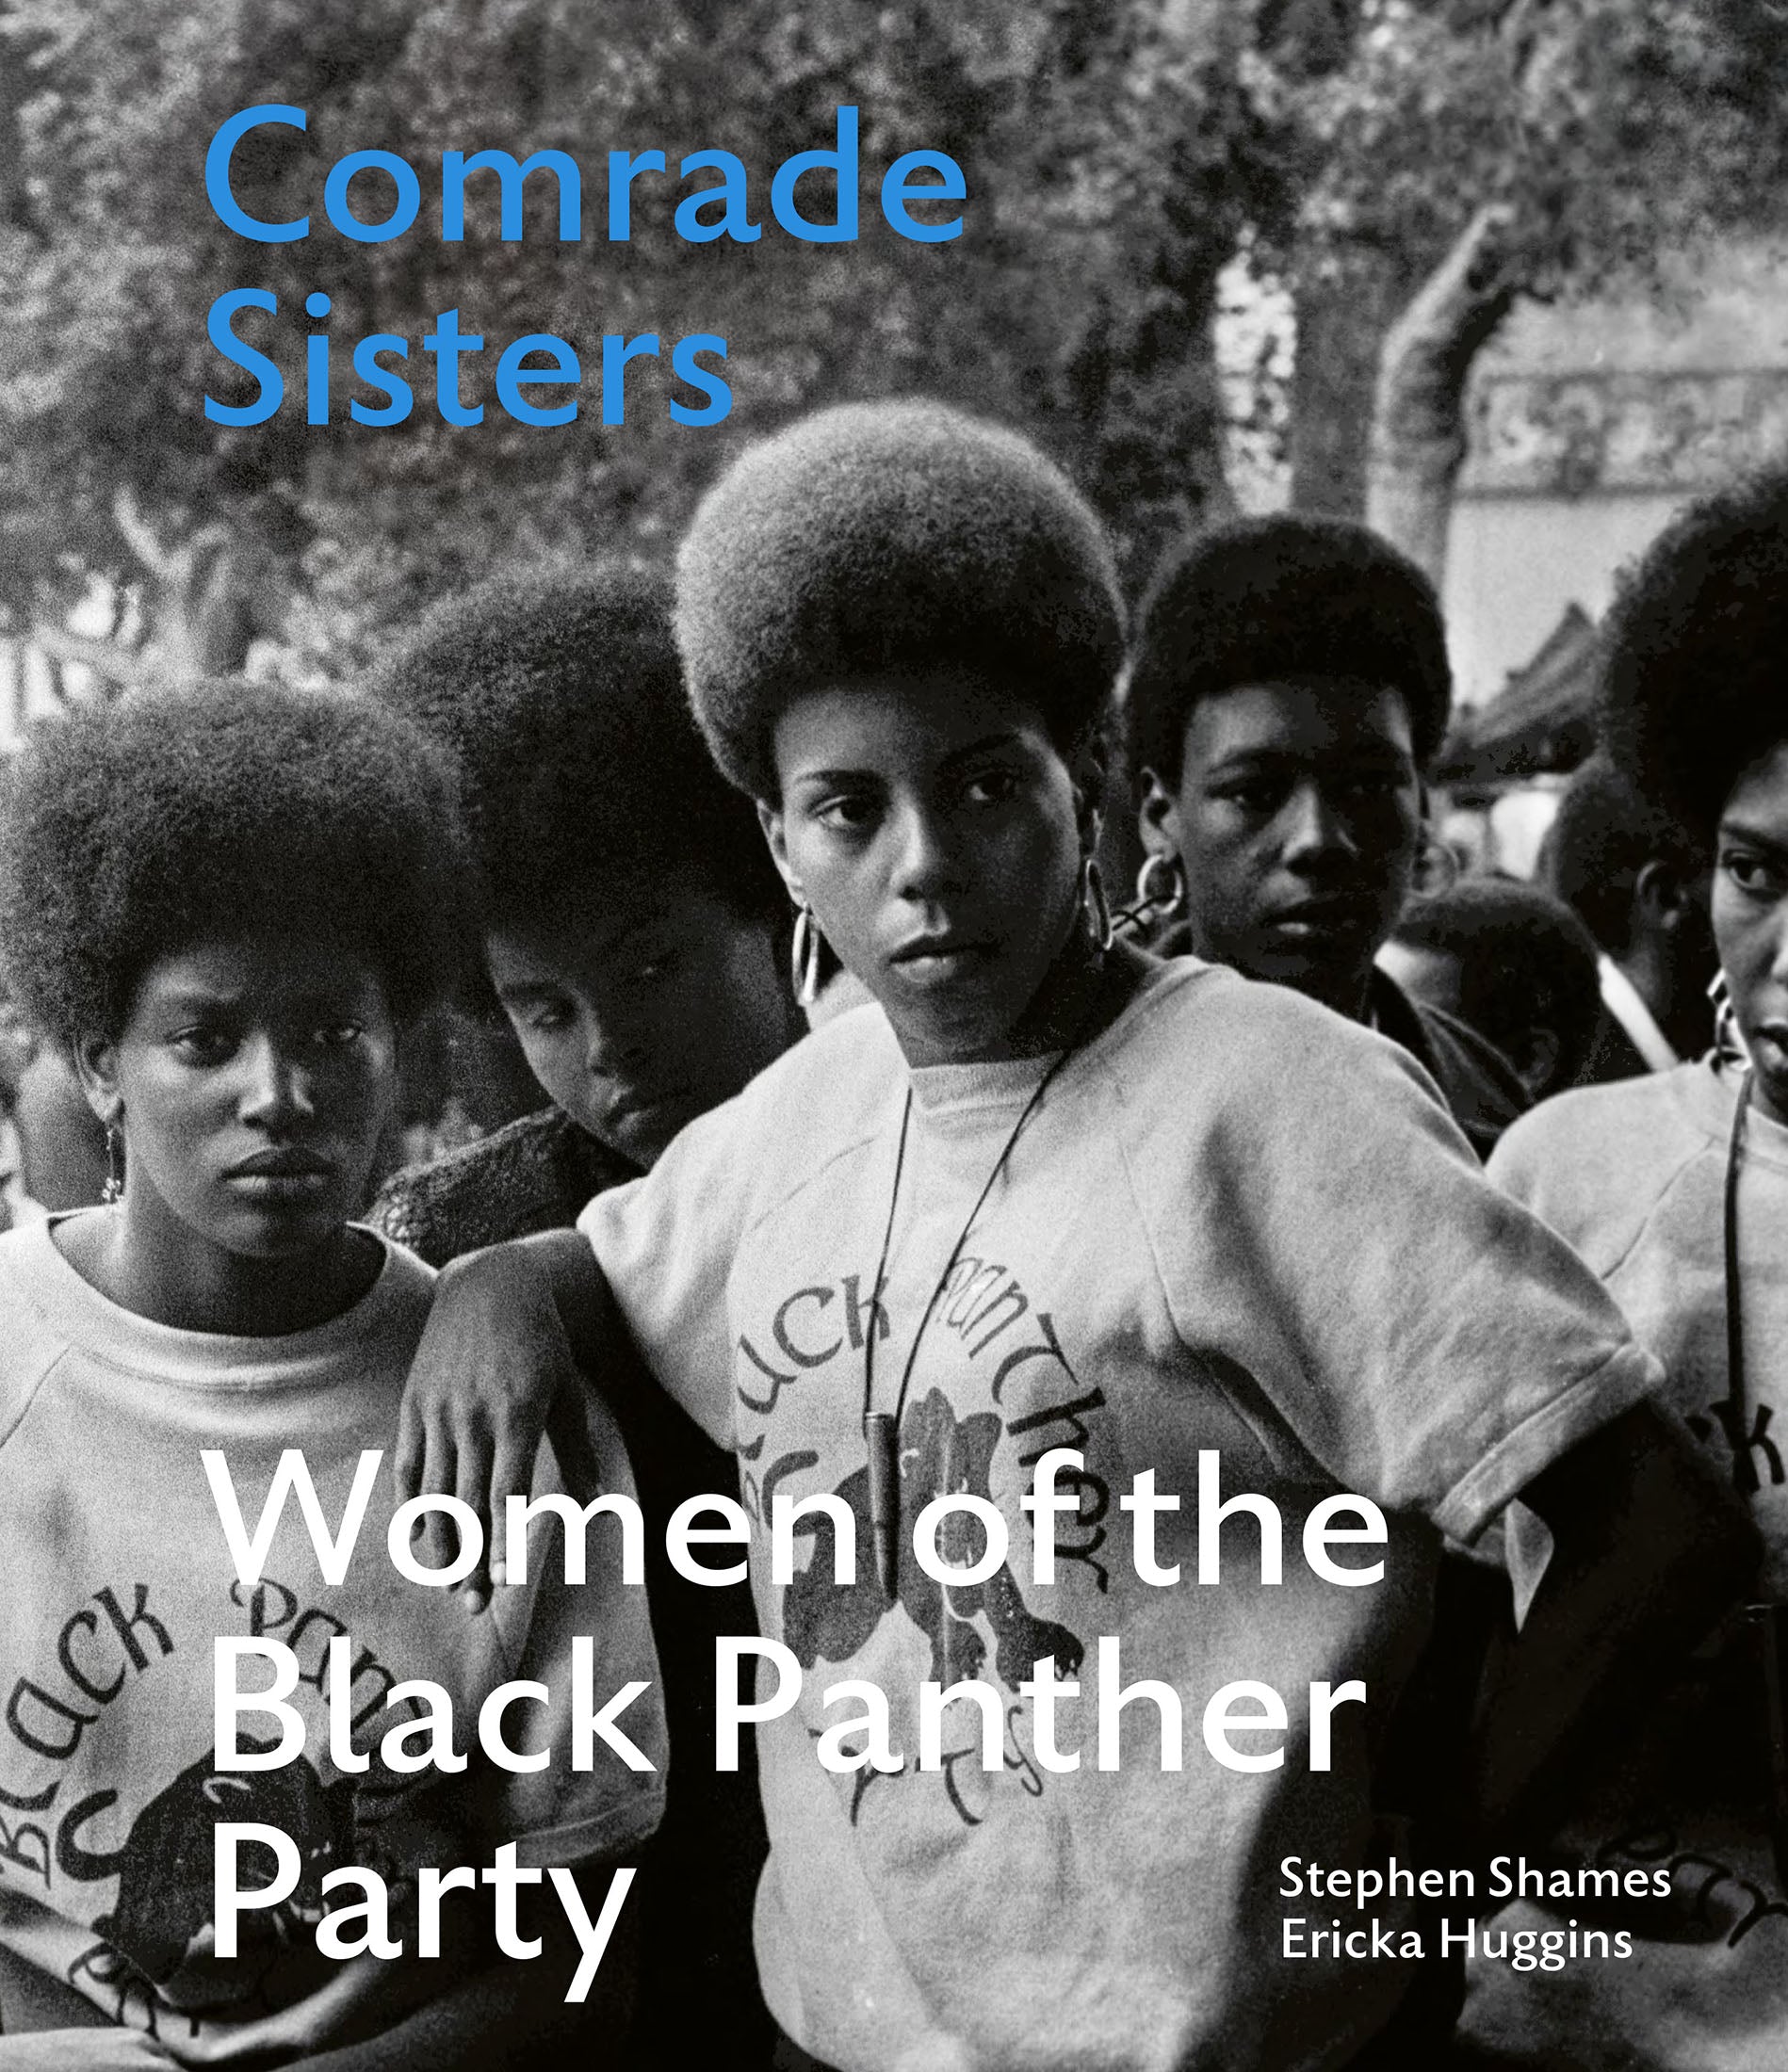 Comrade Sisters Education Bundle (Comrade Sisters Photobook and Discus –  Shop ADLE